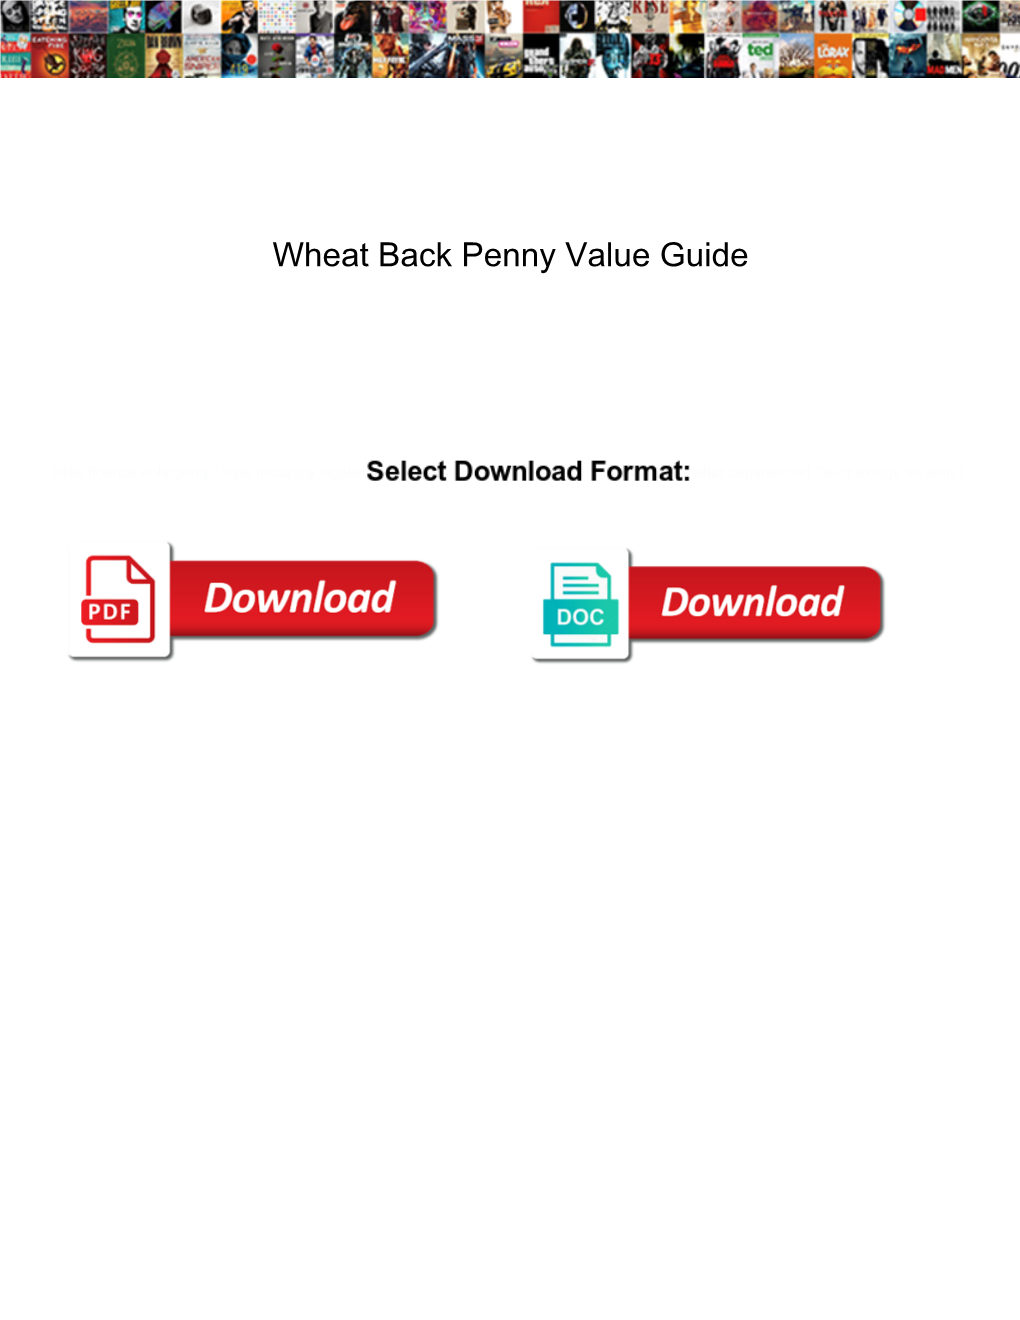 Wheat Back Penny Value Guide